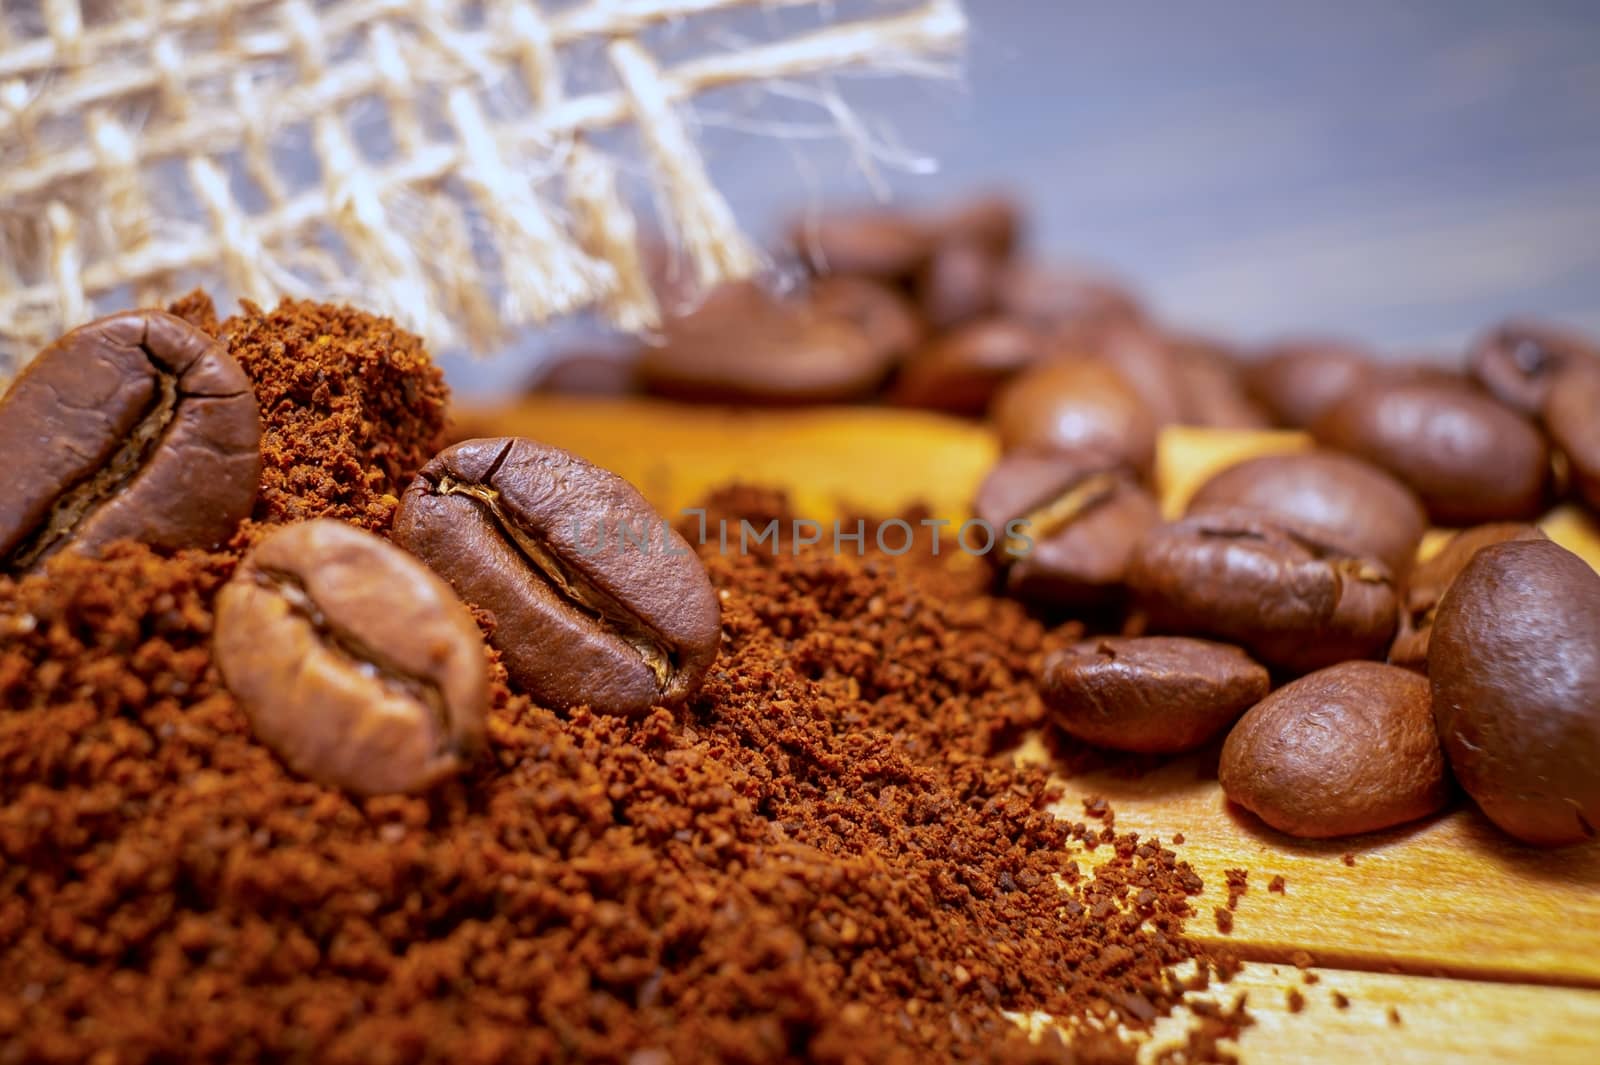 Roasted coffee beans and ground coffee by NetPix